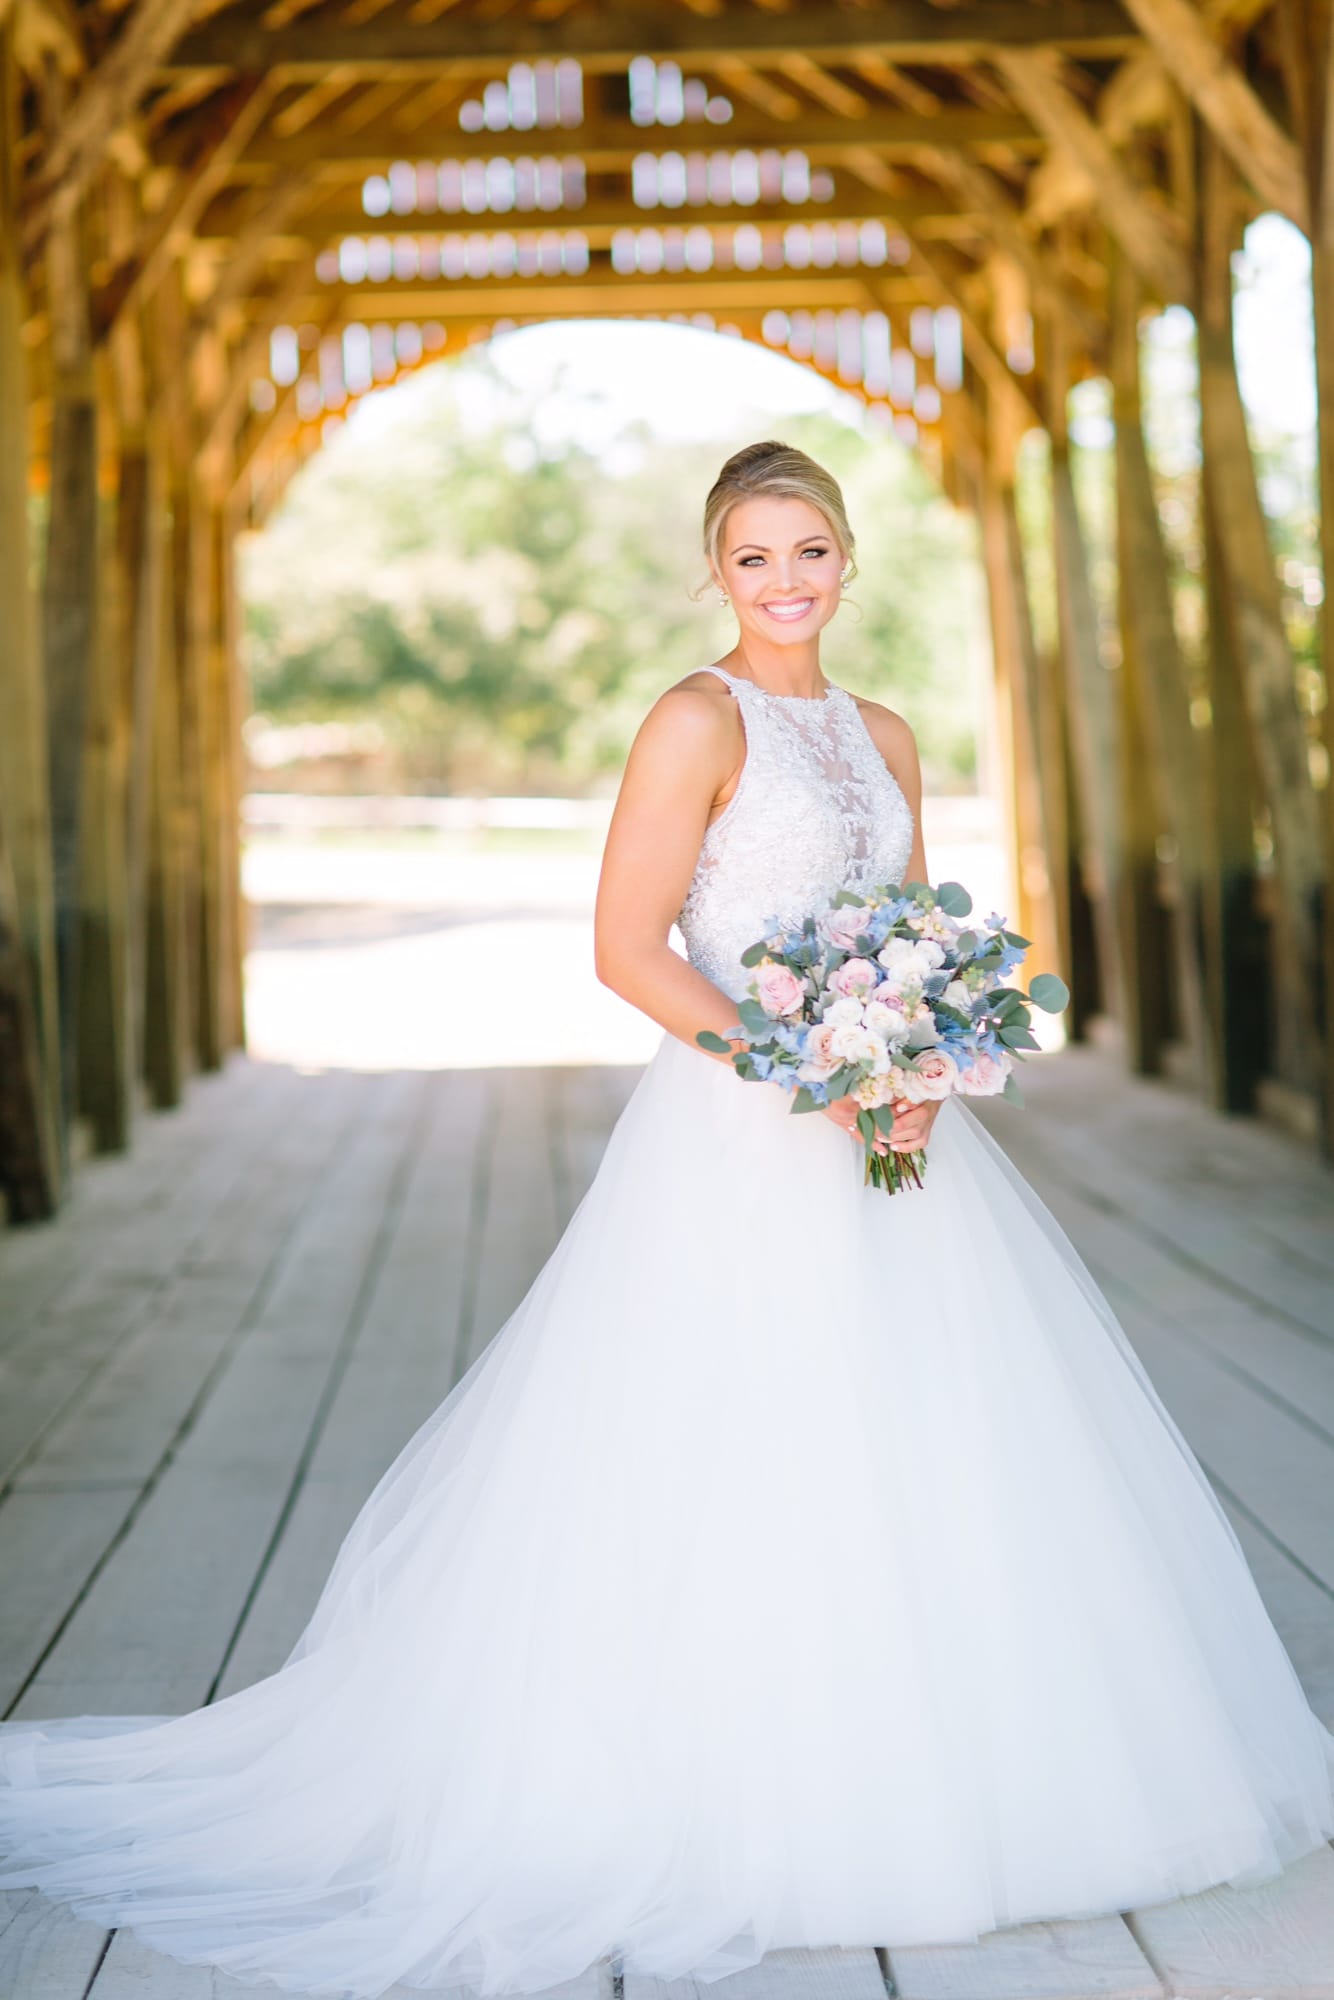 Pretty Summer Wedding And A Princess Ballgown - Maggie Bride wearing Lisette by Maggie Sottero